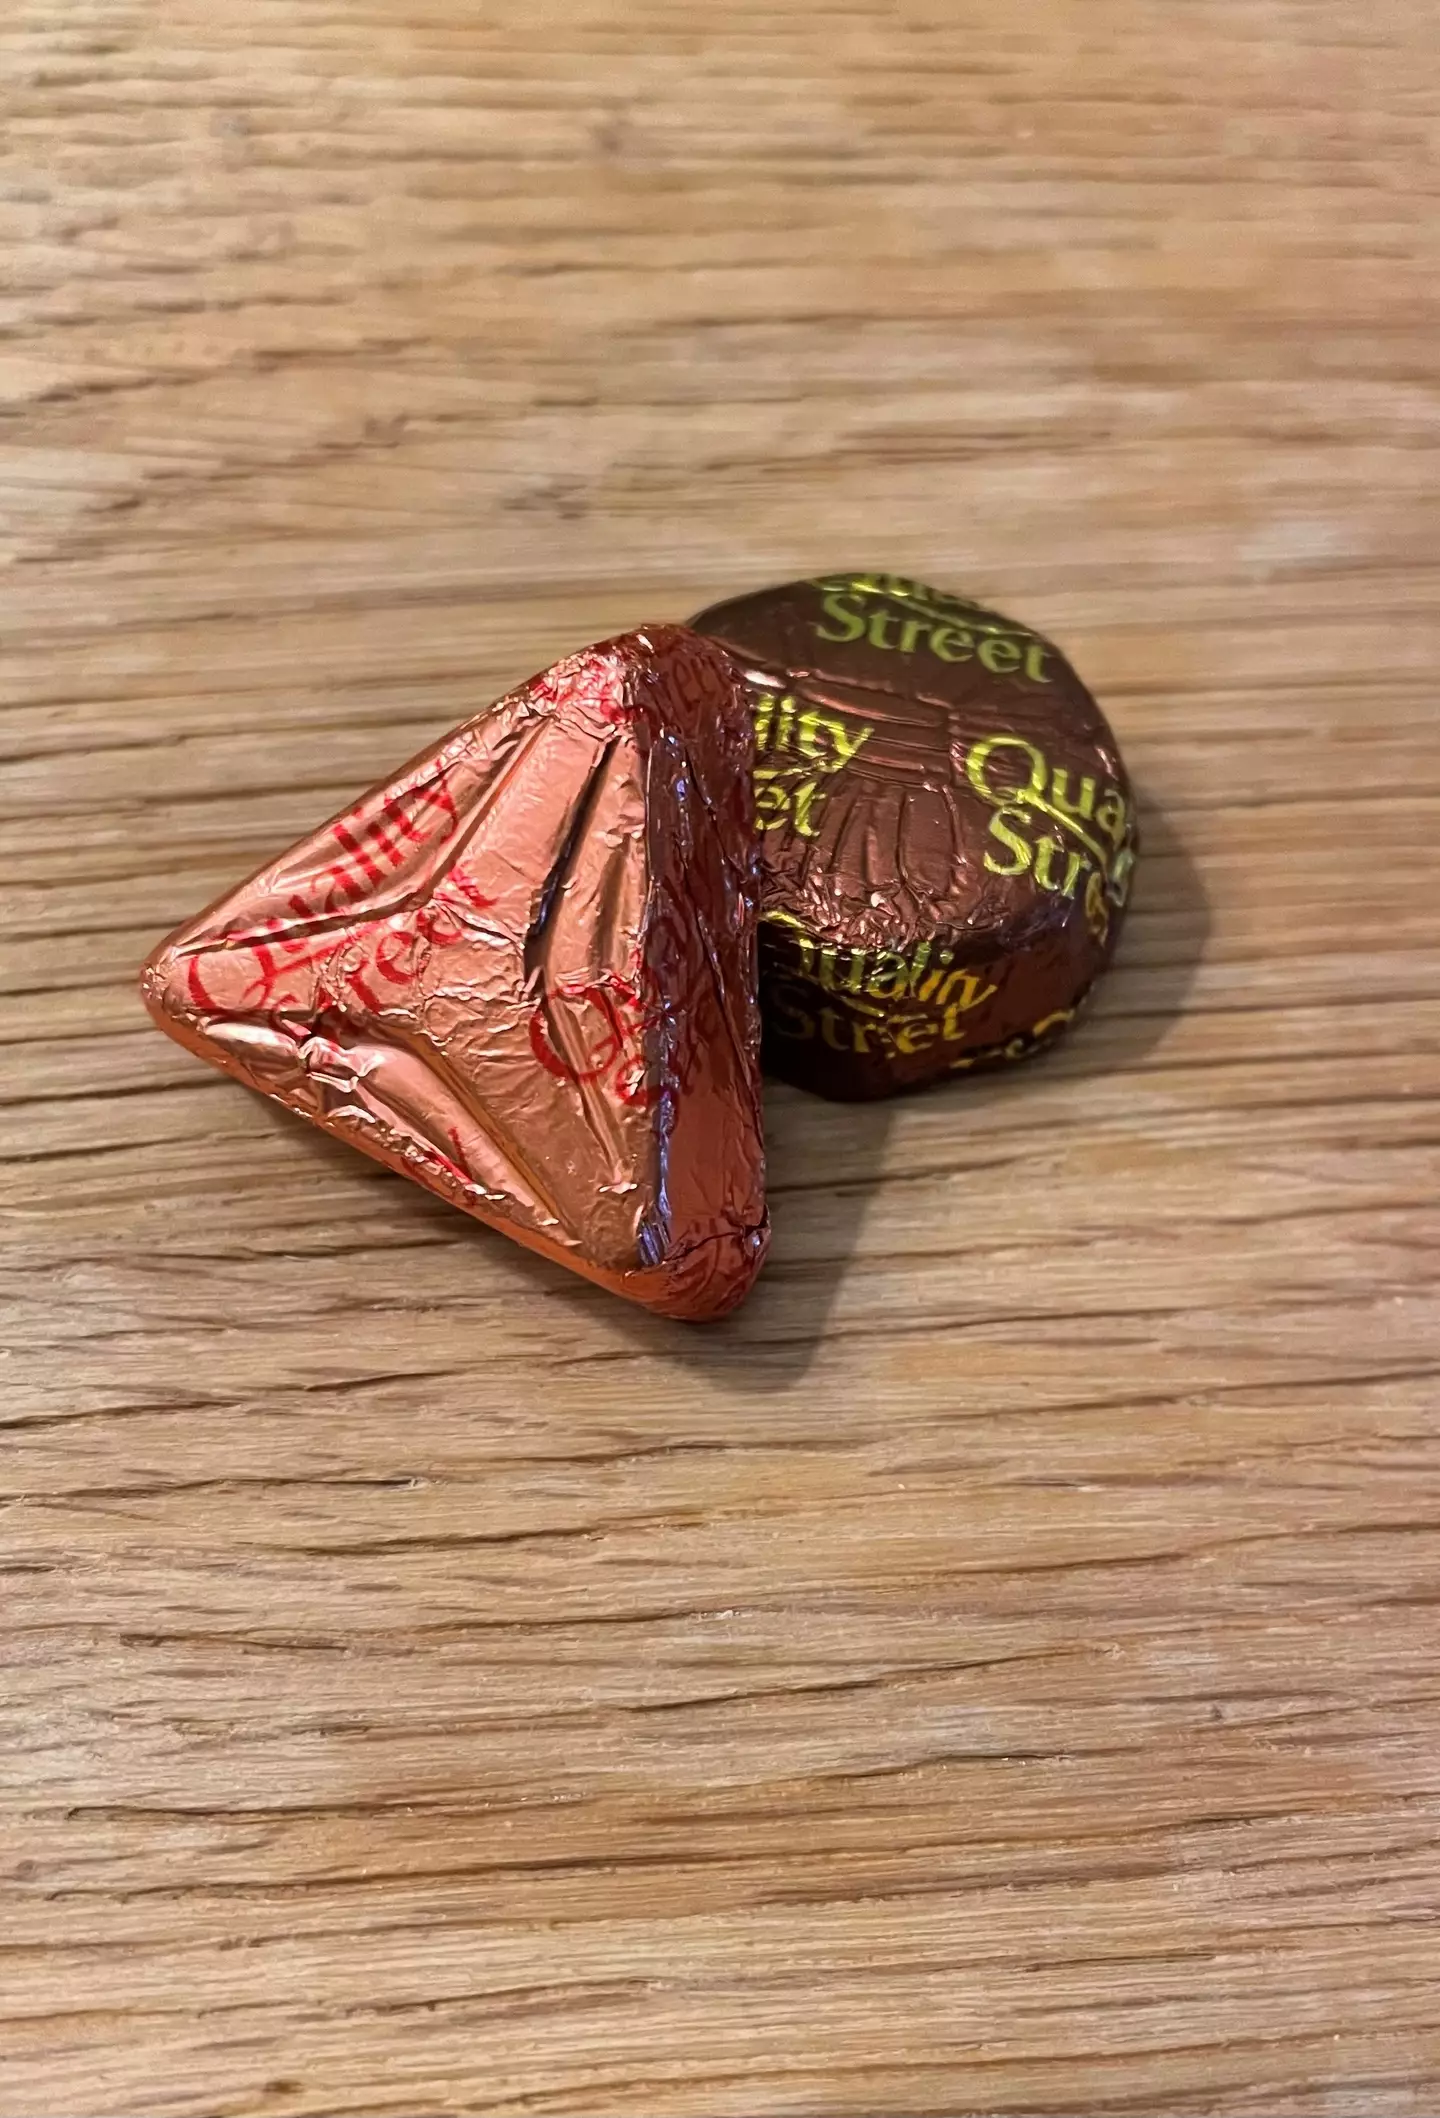 The chocolates have been temporarily wrapped in different colour foil.